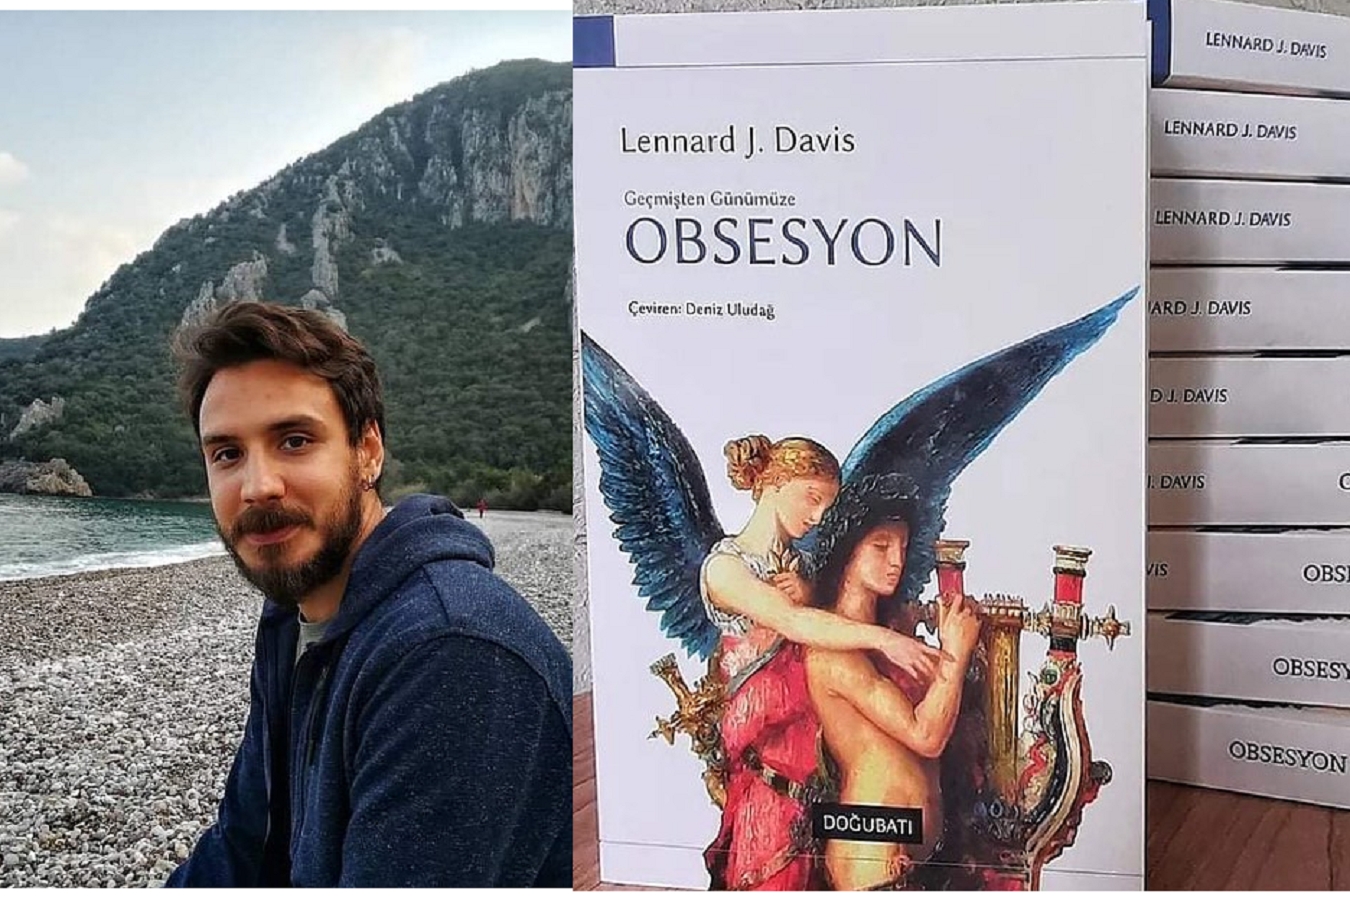 Deniz Uludağ’s translation of “Obsession: A History” has been published.